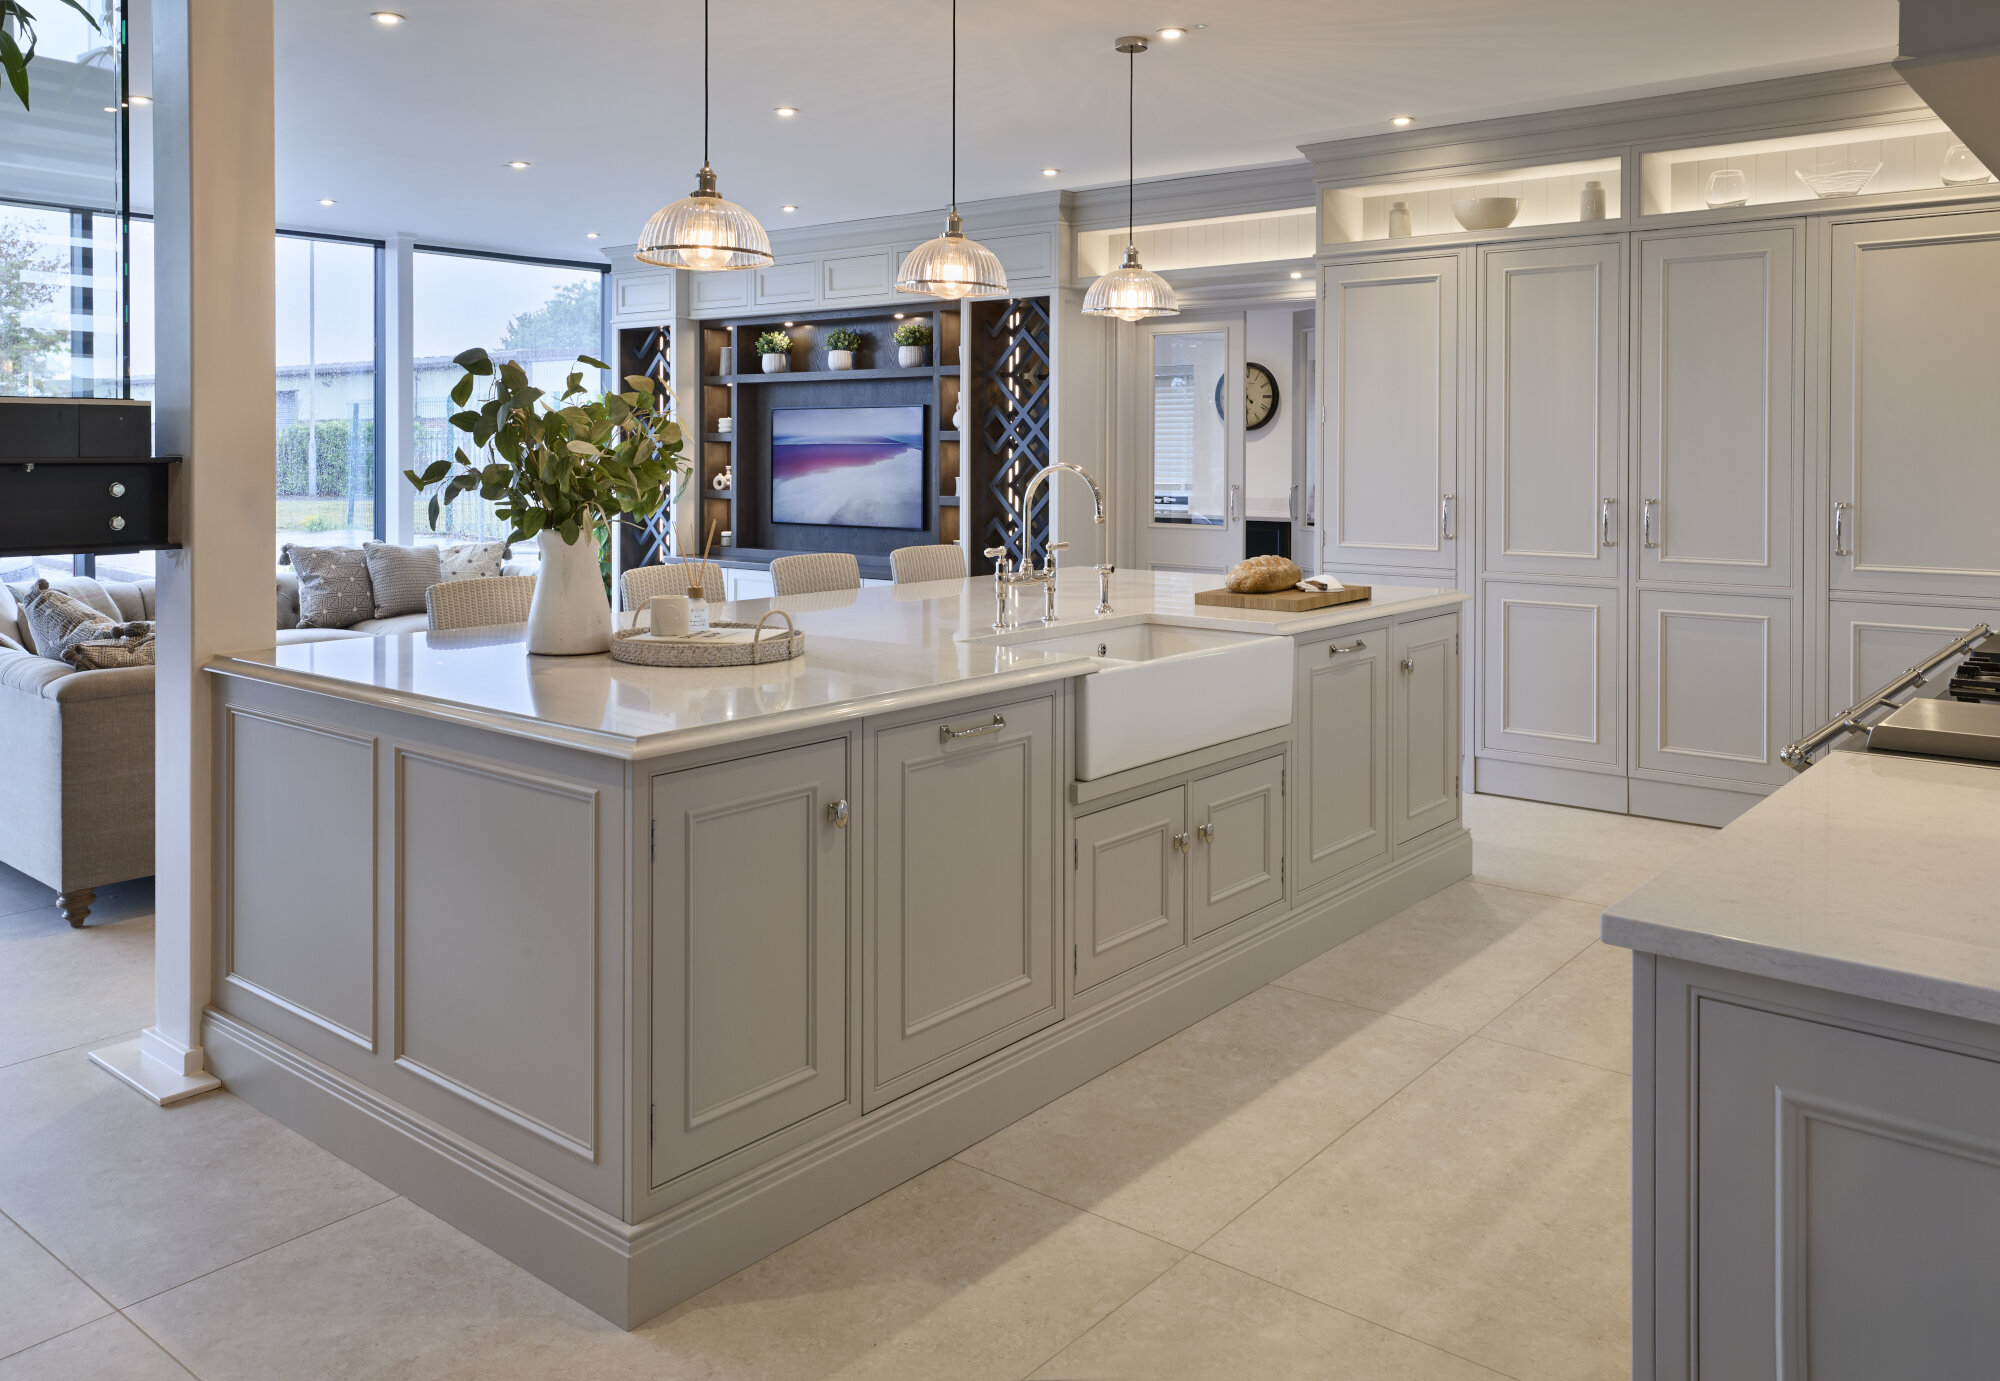 This Bespoke Kitchen Design is on display in our showroom near Eastwood